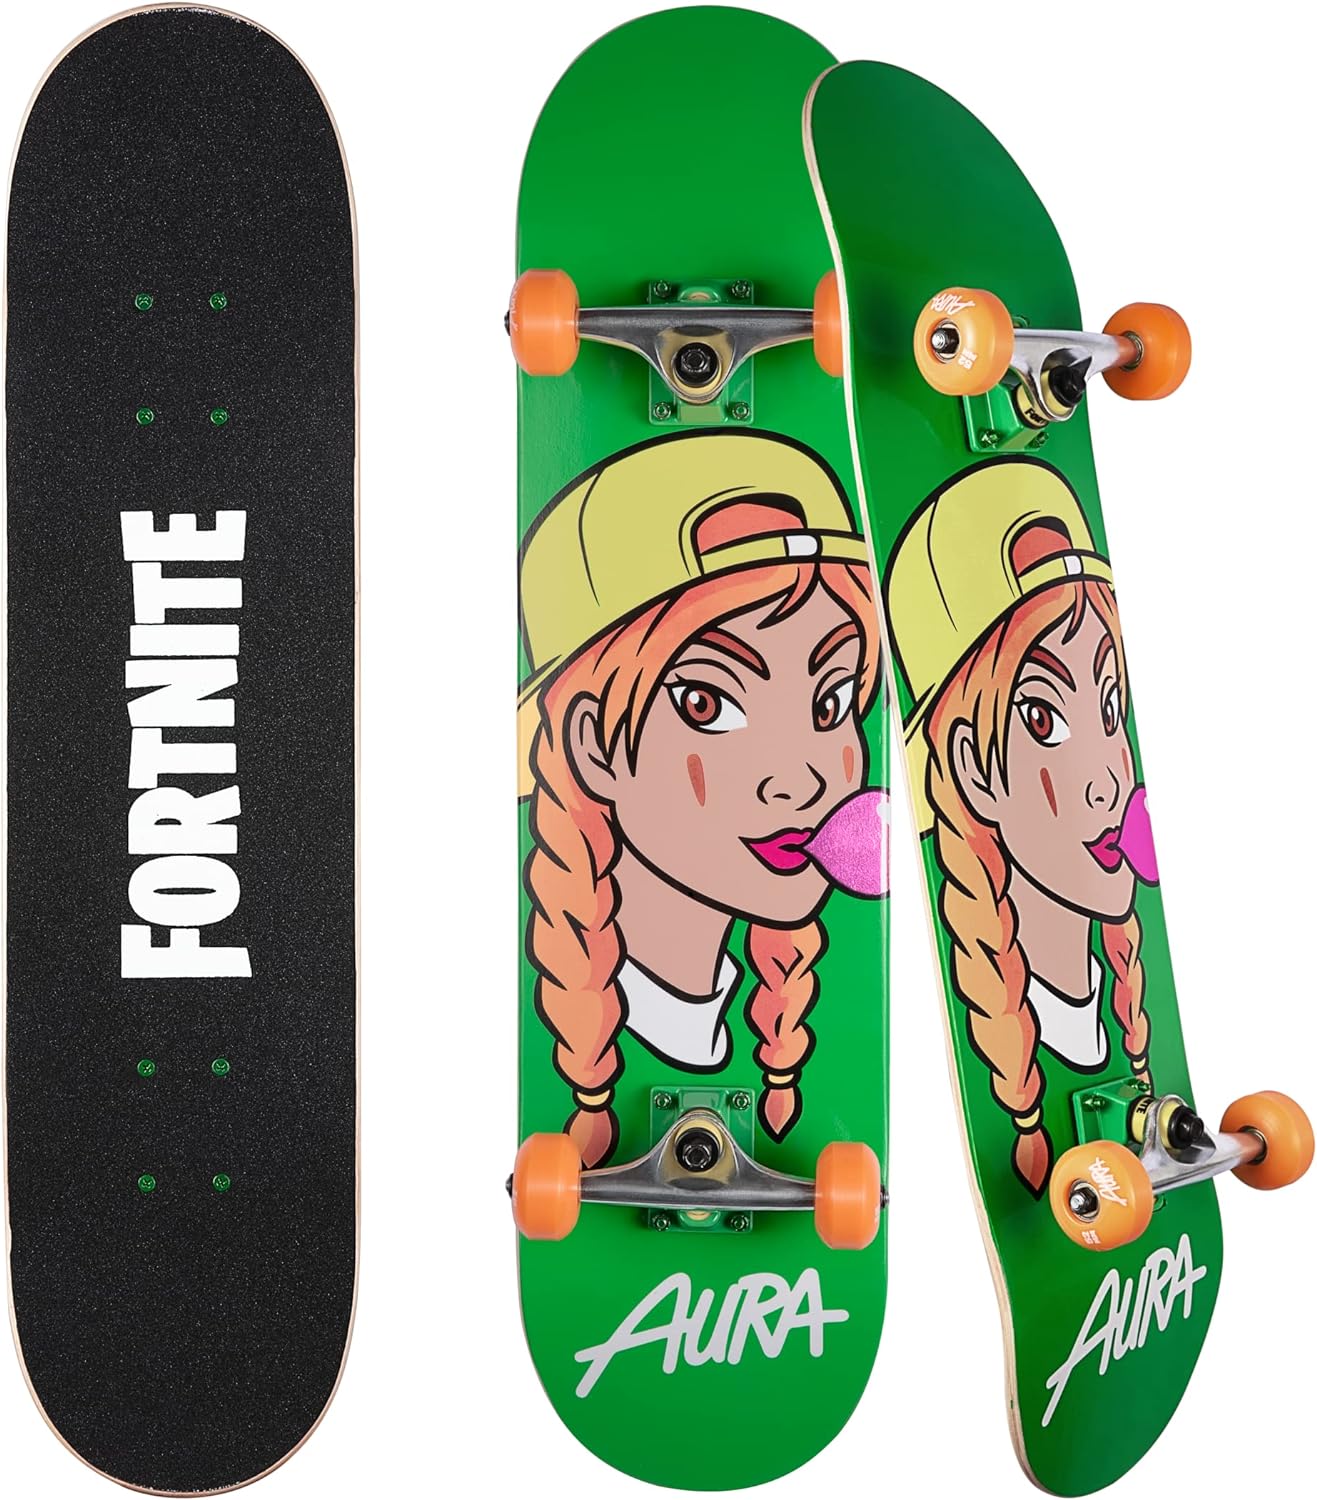 Fortnite 31 Skateboard - Cruiser Skateboard with Printed Graphic Grip Tape, ABEC-5 Bearings, Durable Deck  Smooth Wheels, Great for Teens